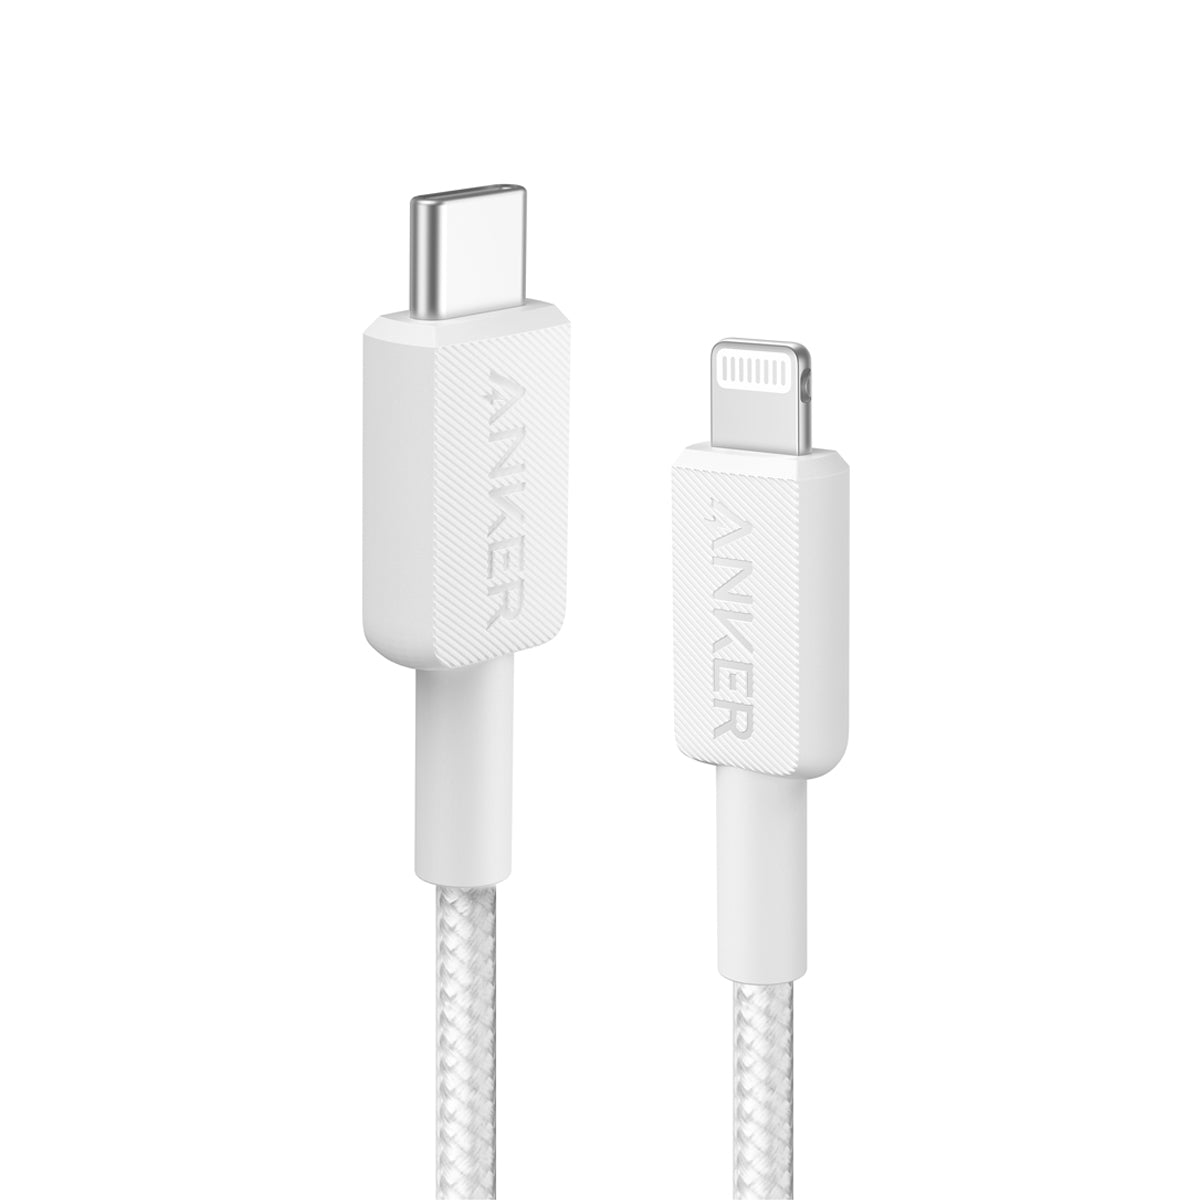 Photos - Cable (video, audio, USB) ANKER 322 1.8 m White A81B6G21 